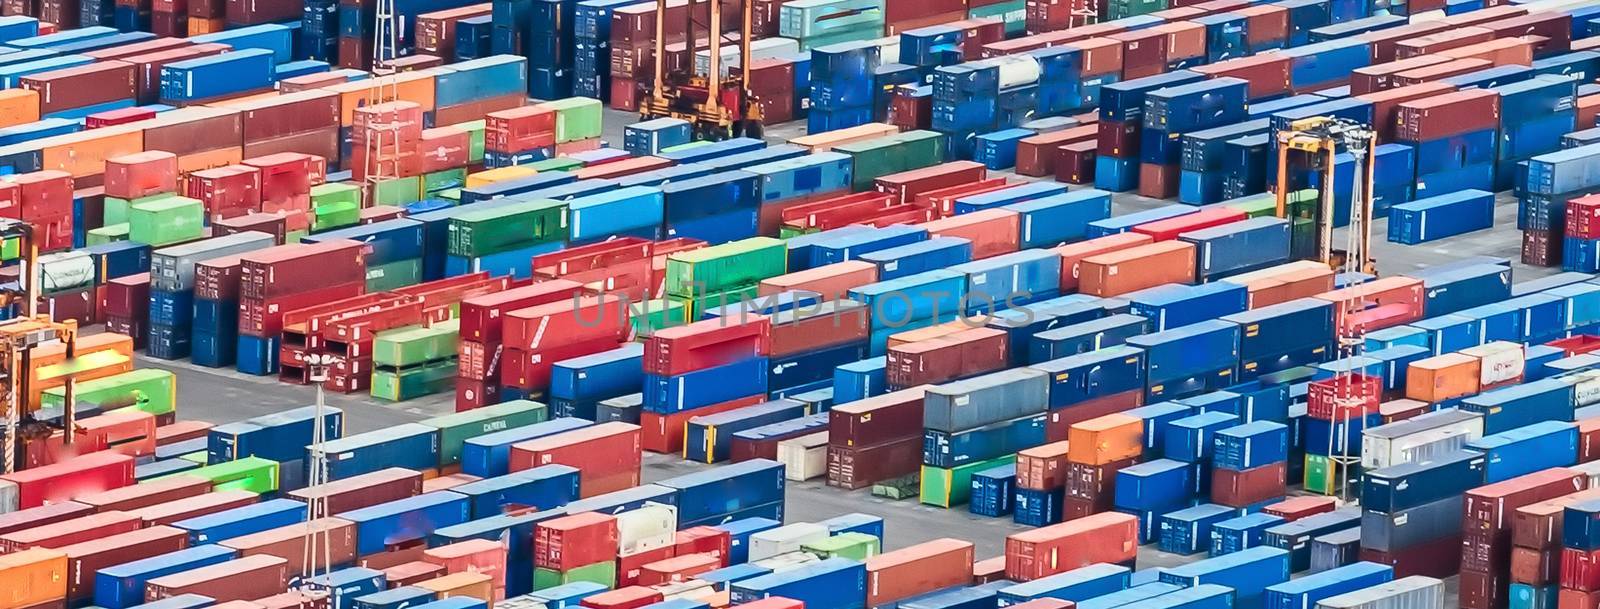 Aerial view over shipping containers stacked on a commercial por by marcorubino